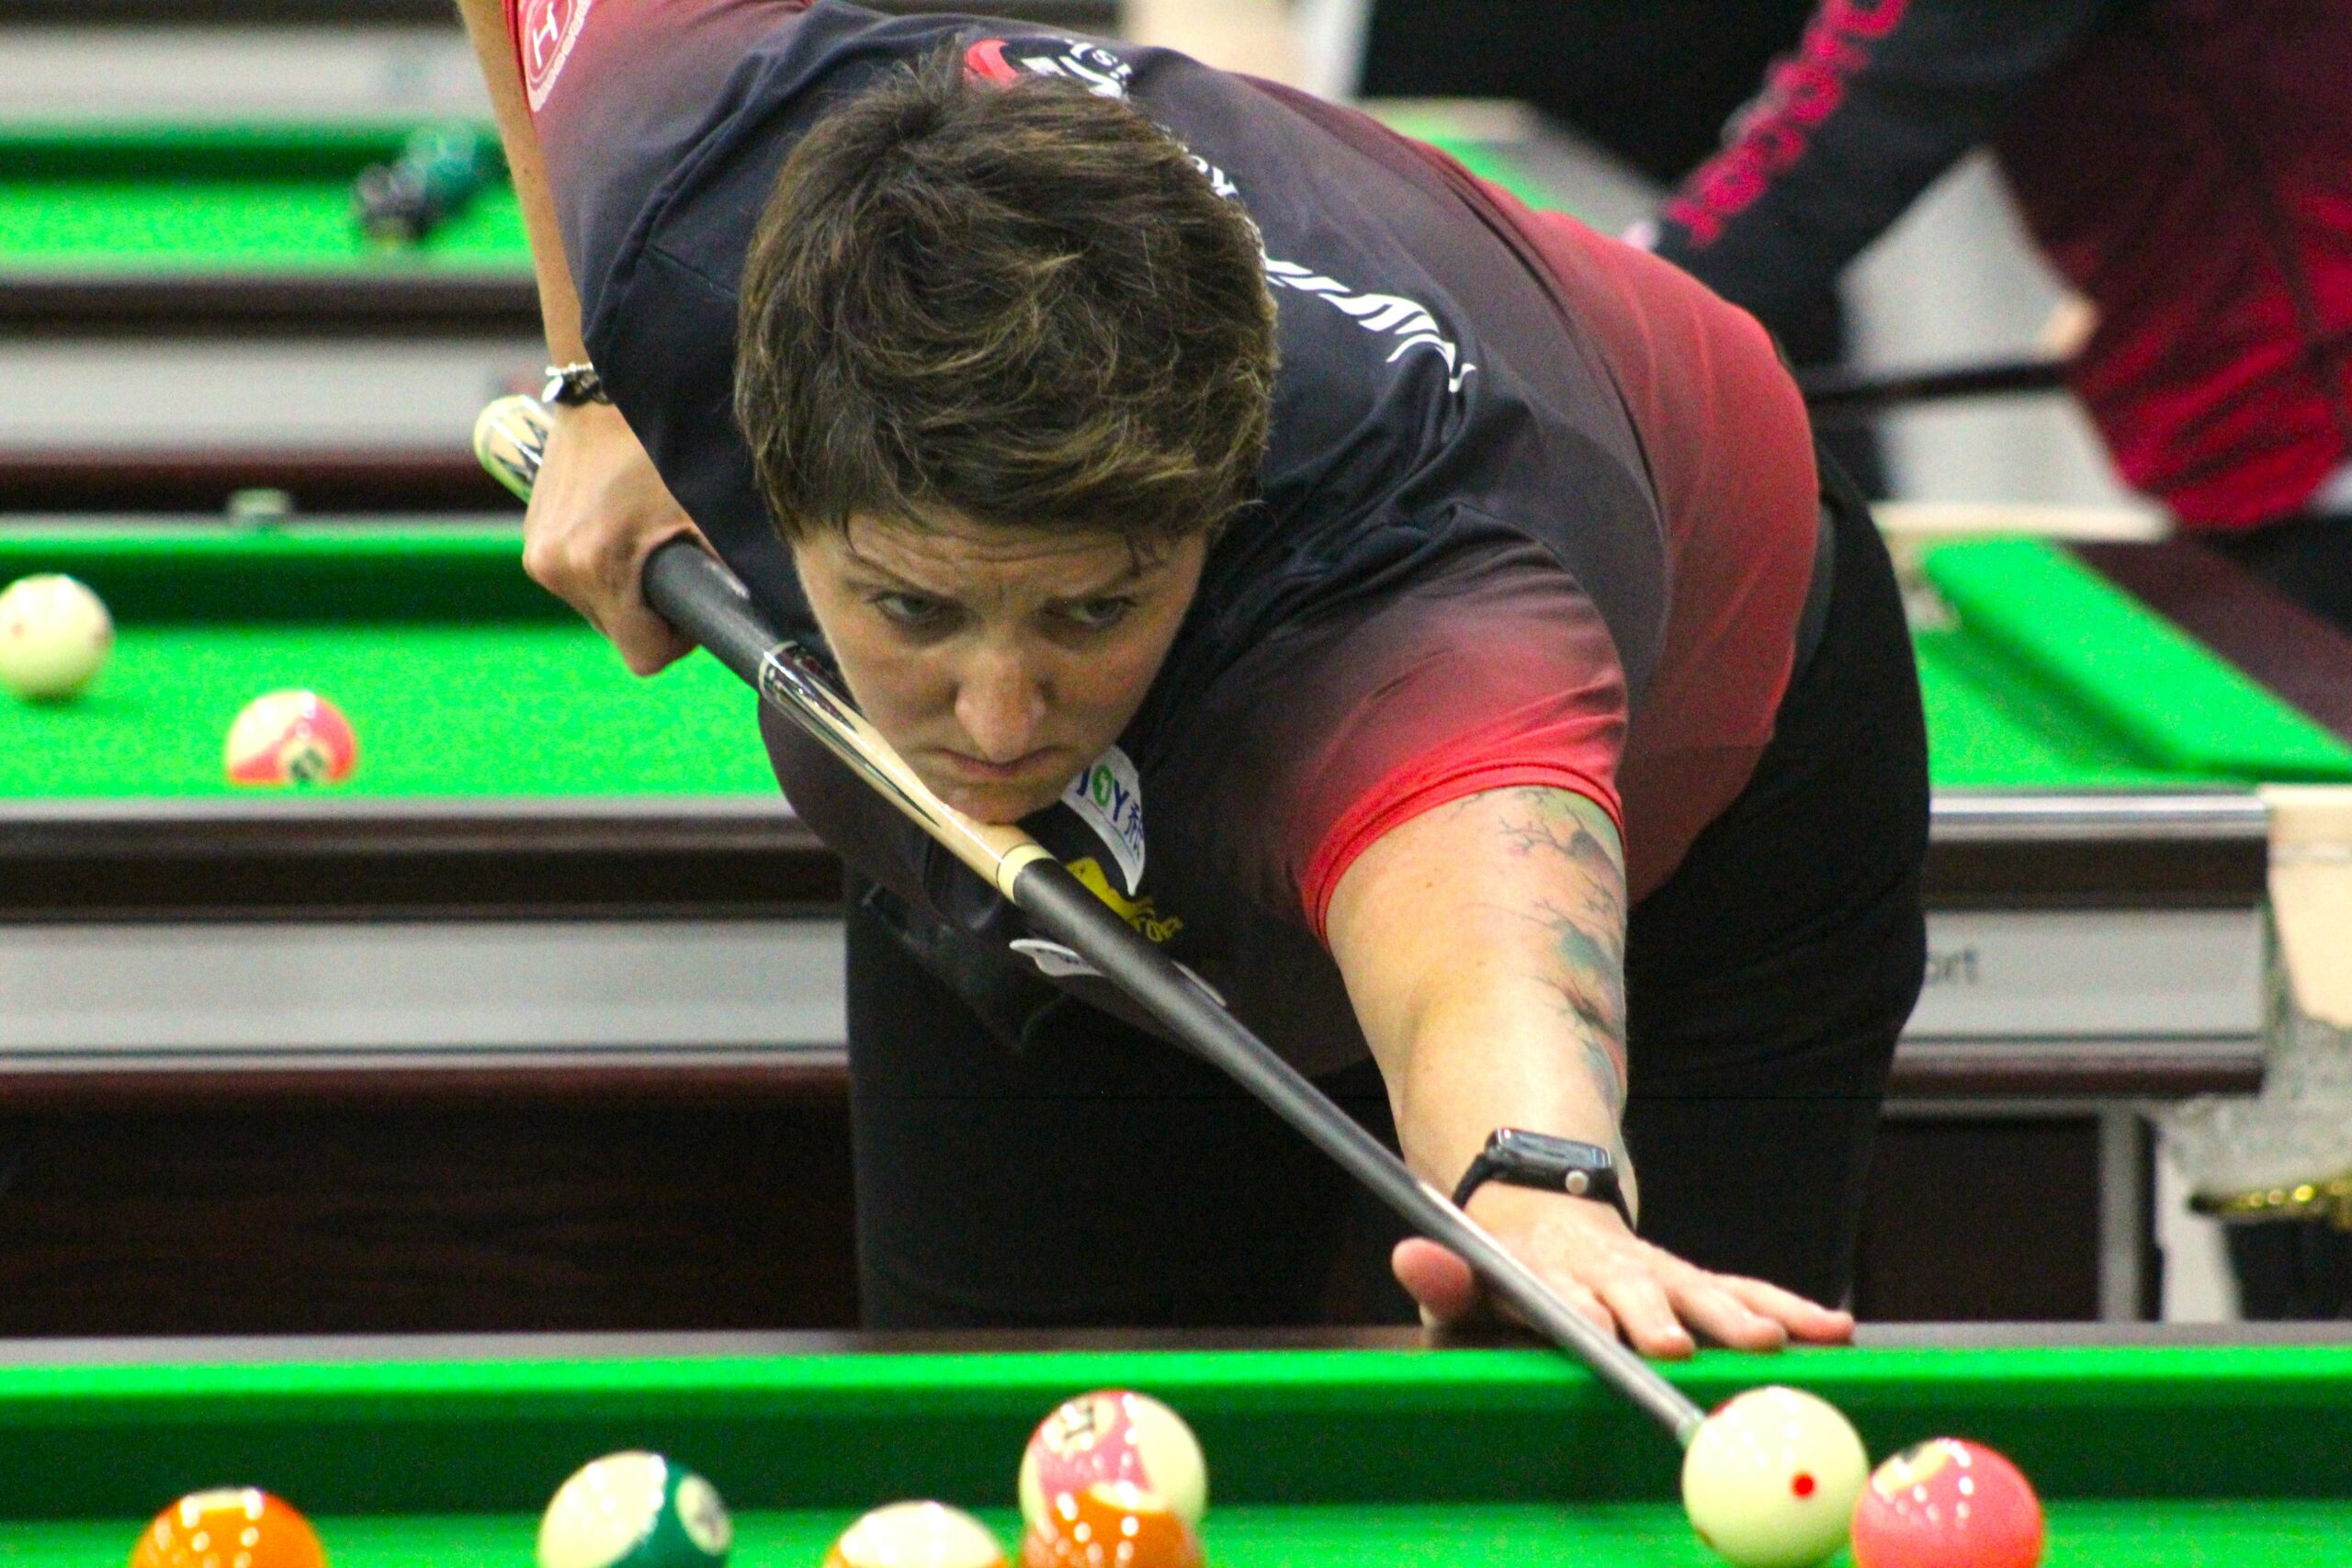 ‘The Michael Jordan of women’s pool’ travels from UK to Quincy to compete in billiards tournament – Muddy River Sports